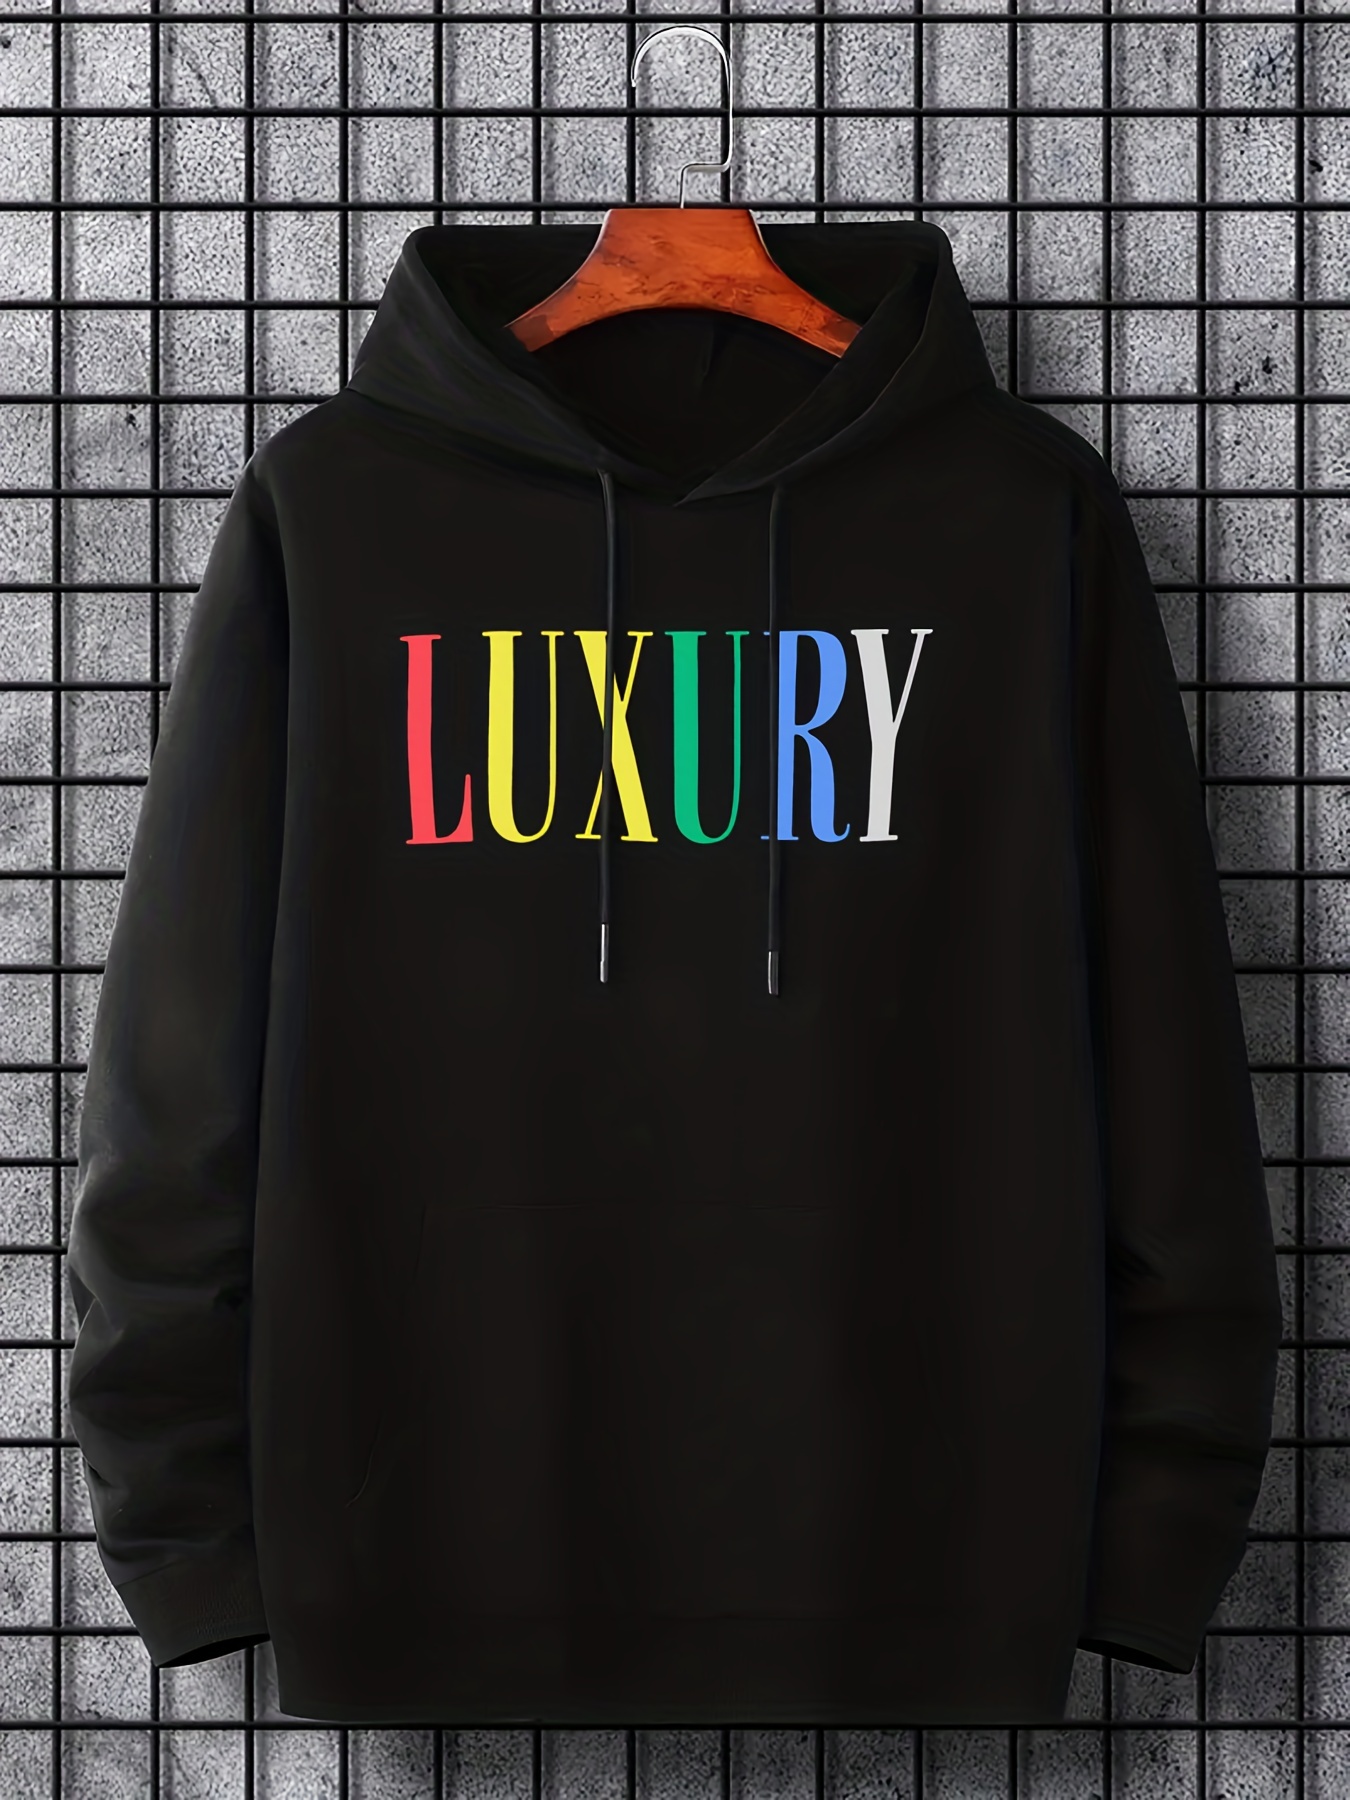 Louis Vuitton Grey Hoodie Luxury Brand Clothing Clothes Outfit For